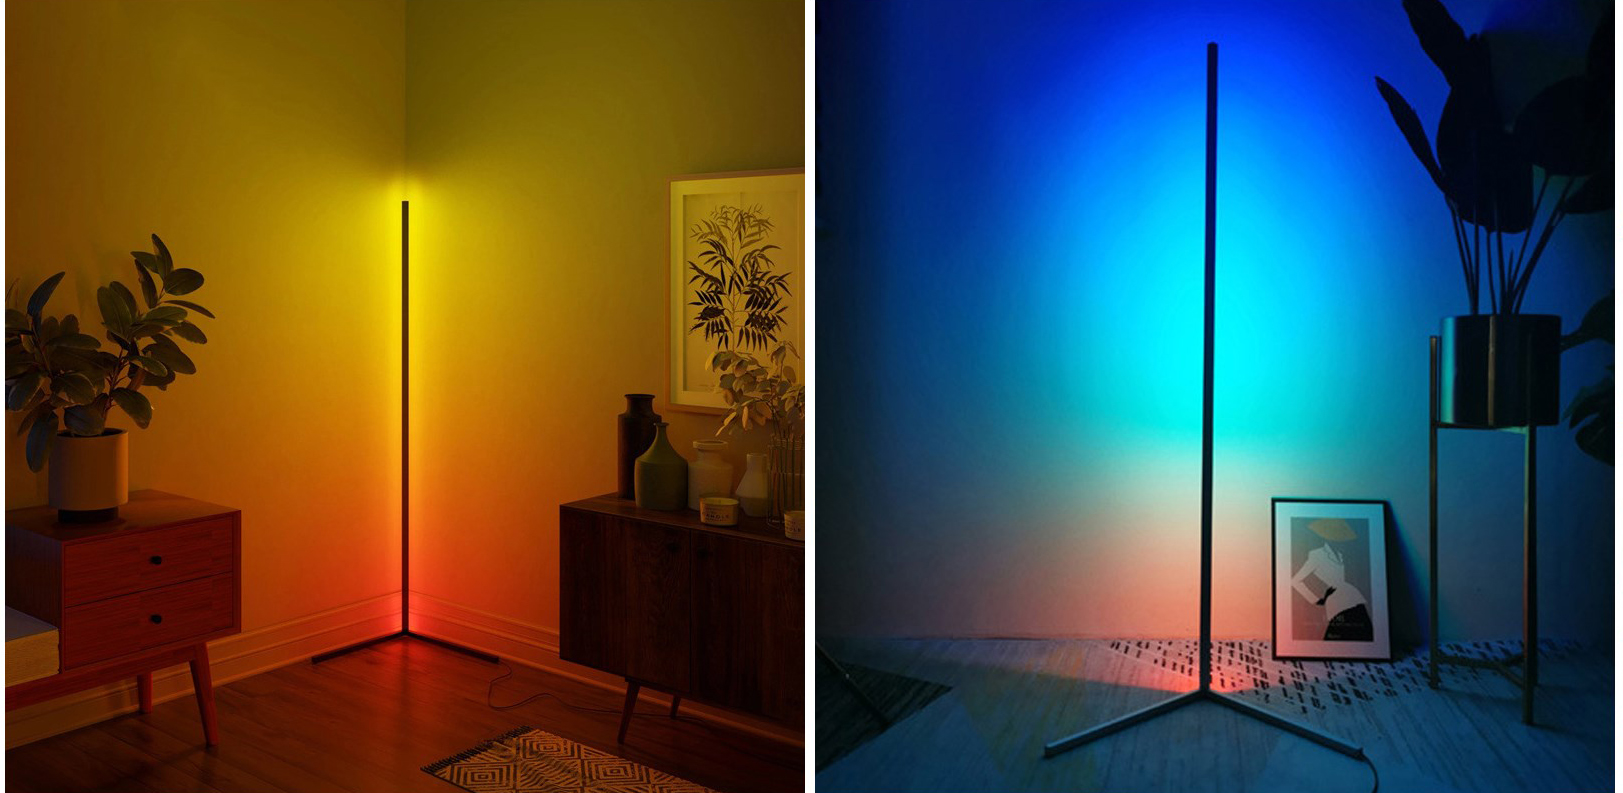 New Product Release-RGB Floor Light to Make Home Decoration Colorful